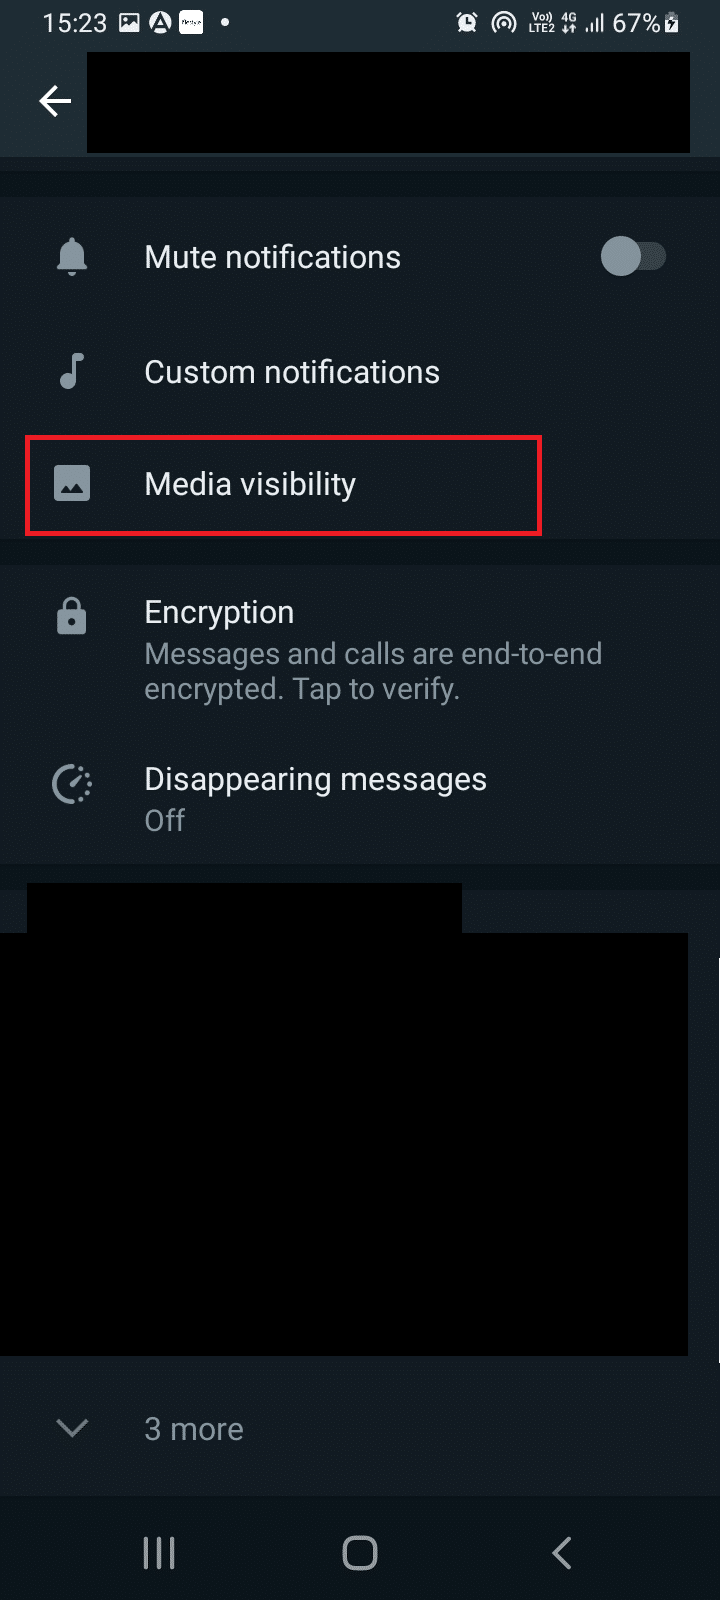 Tap Media visibility. How to Stop Auto Download in WhatsApp